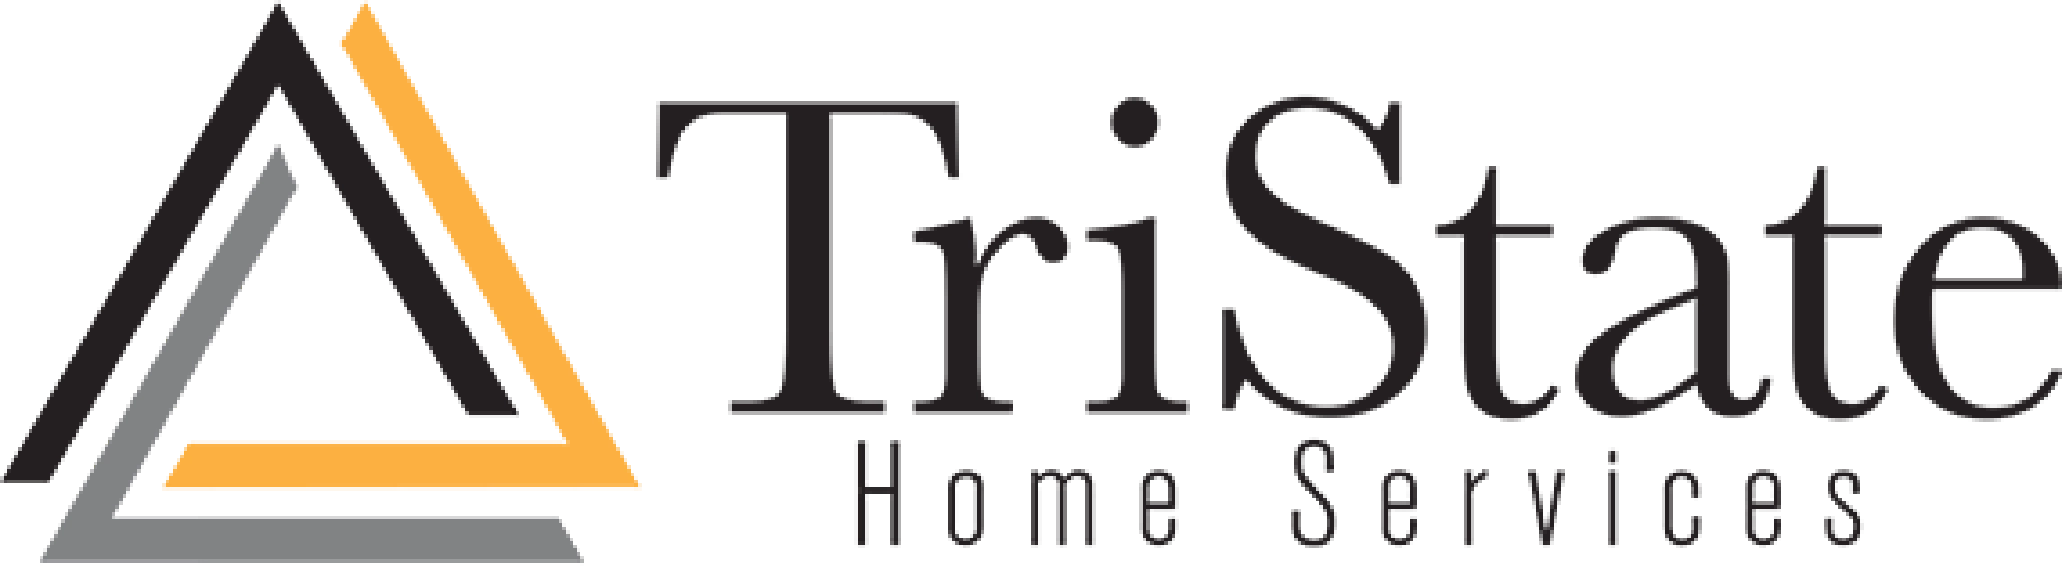 TriState Home Services Logo